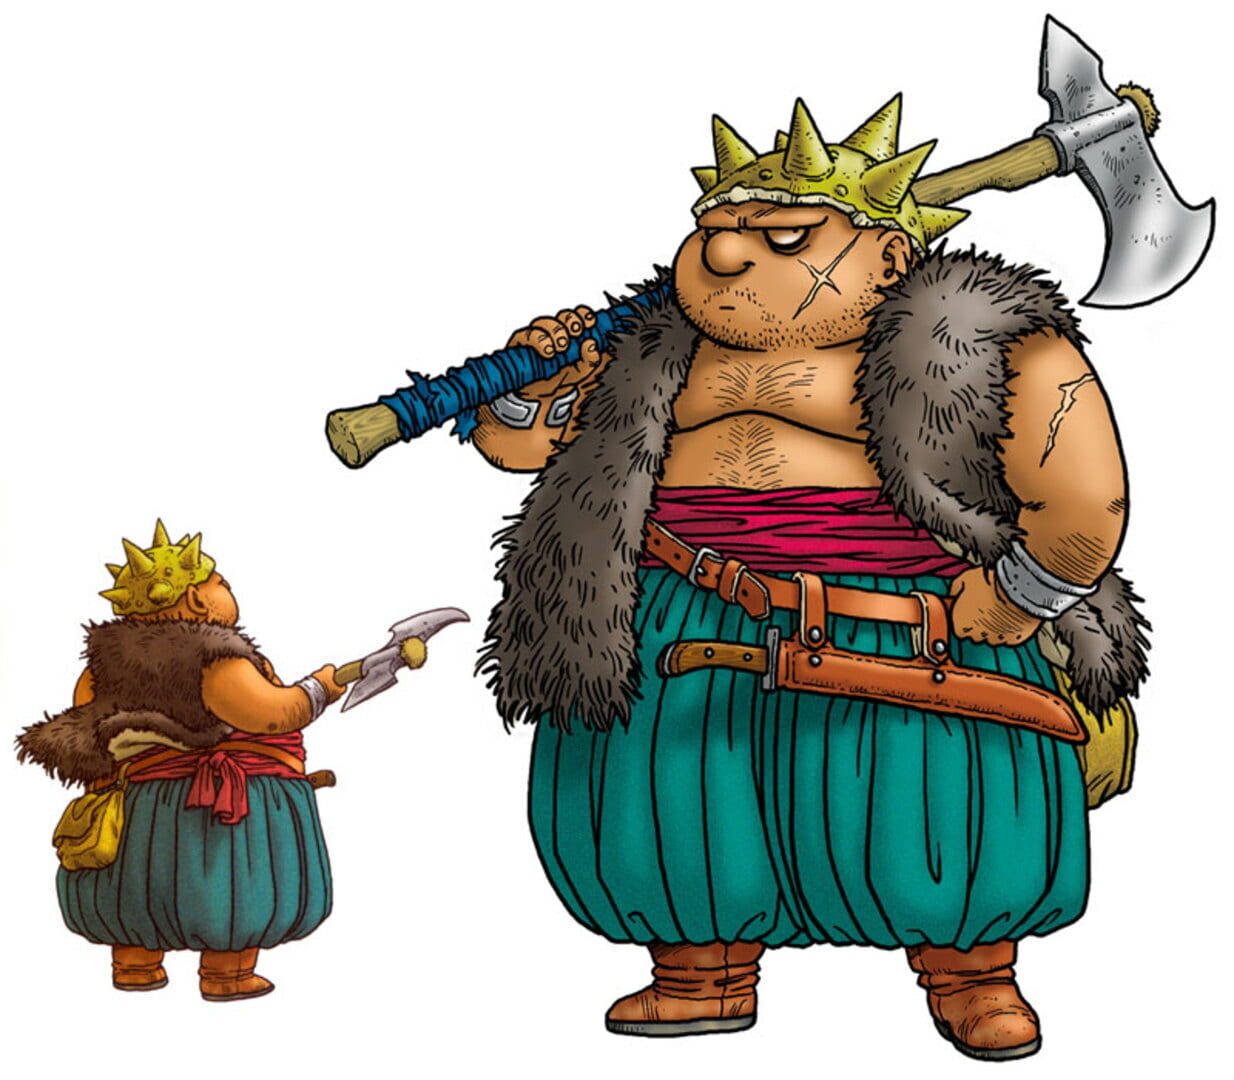 Arte - Dragon Quest VIII: Journey of the Cursed King